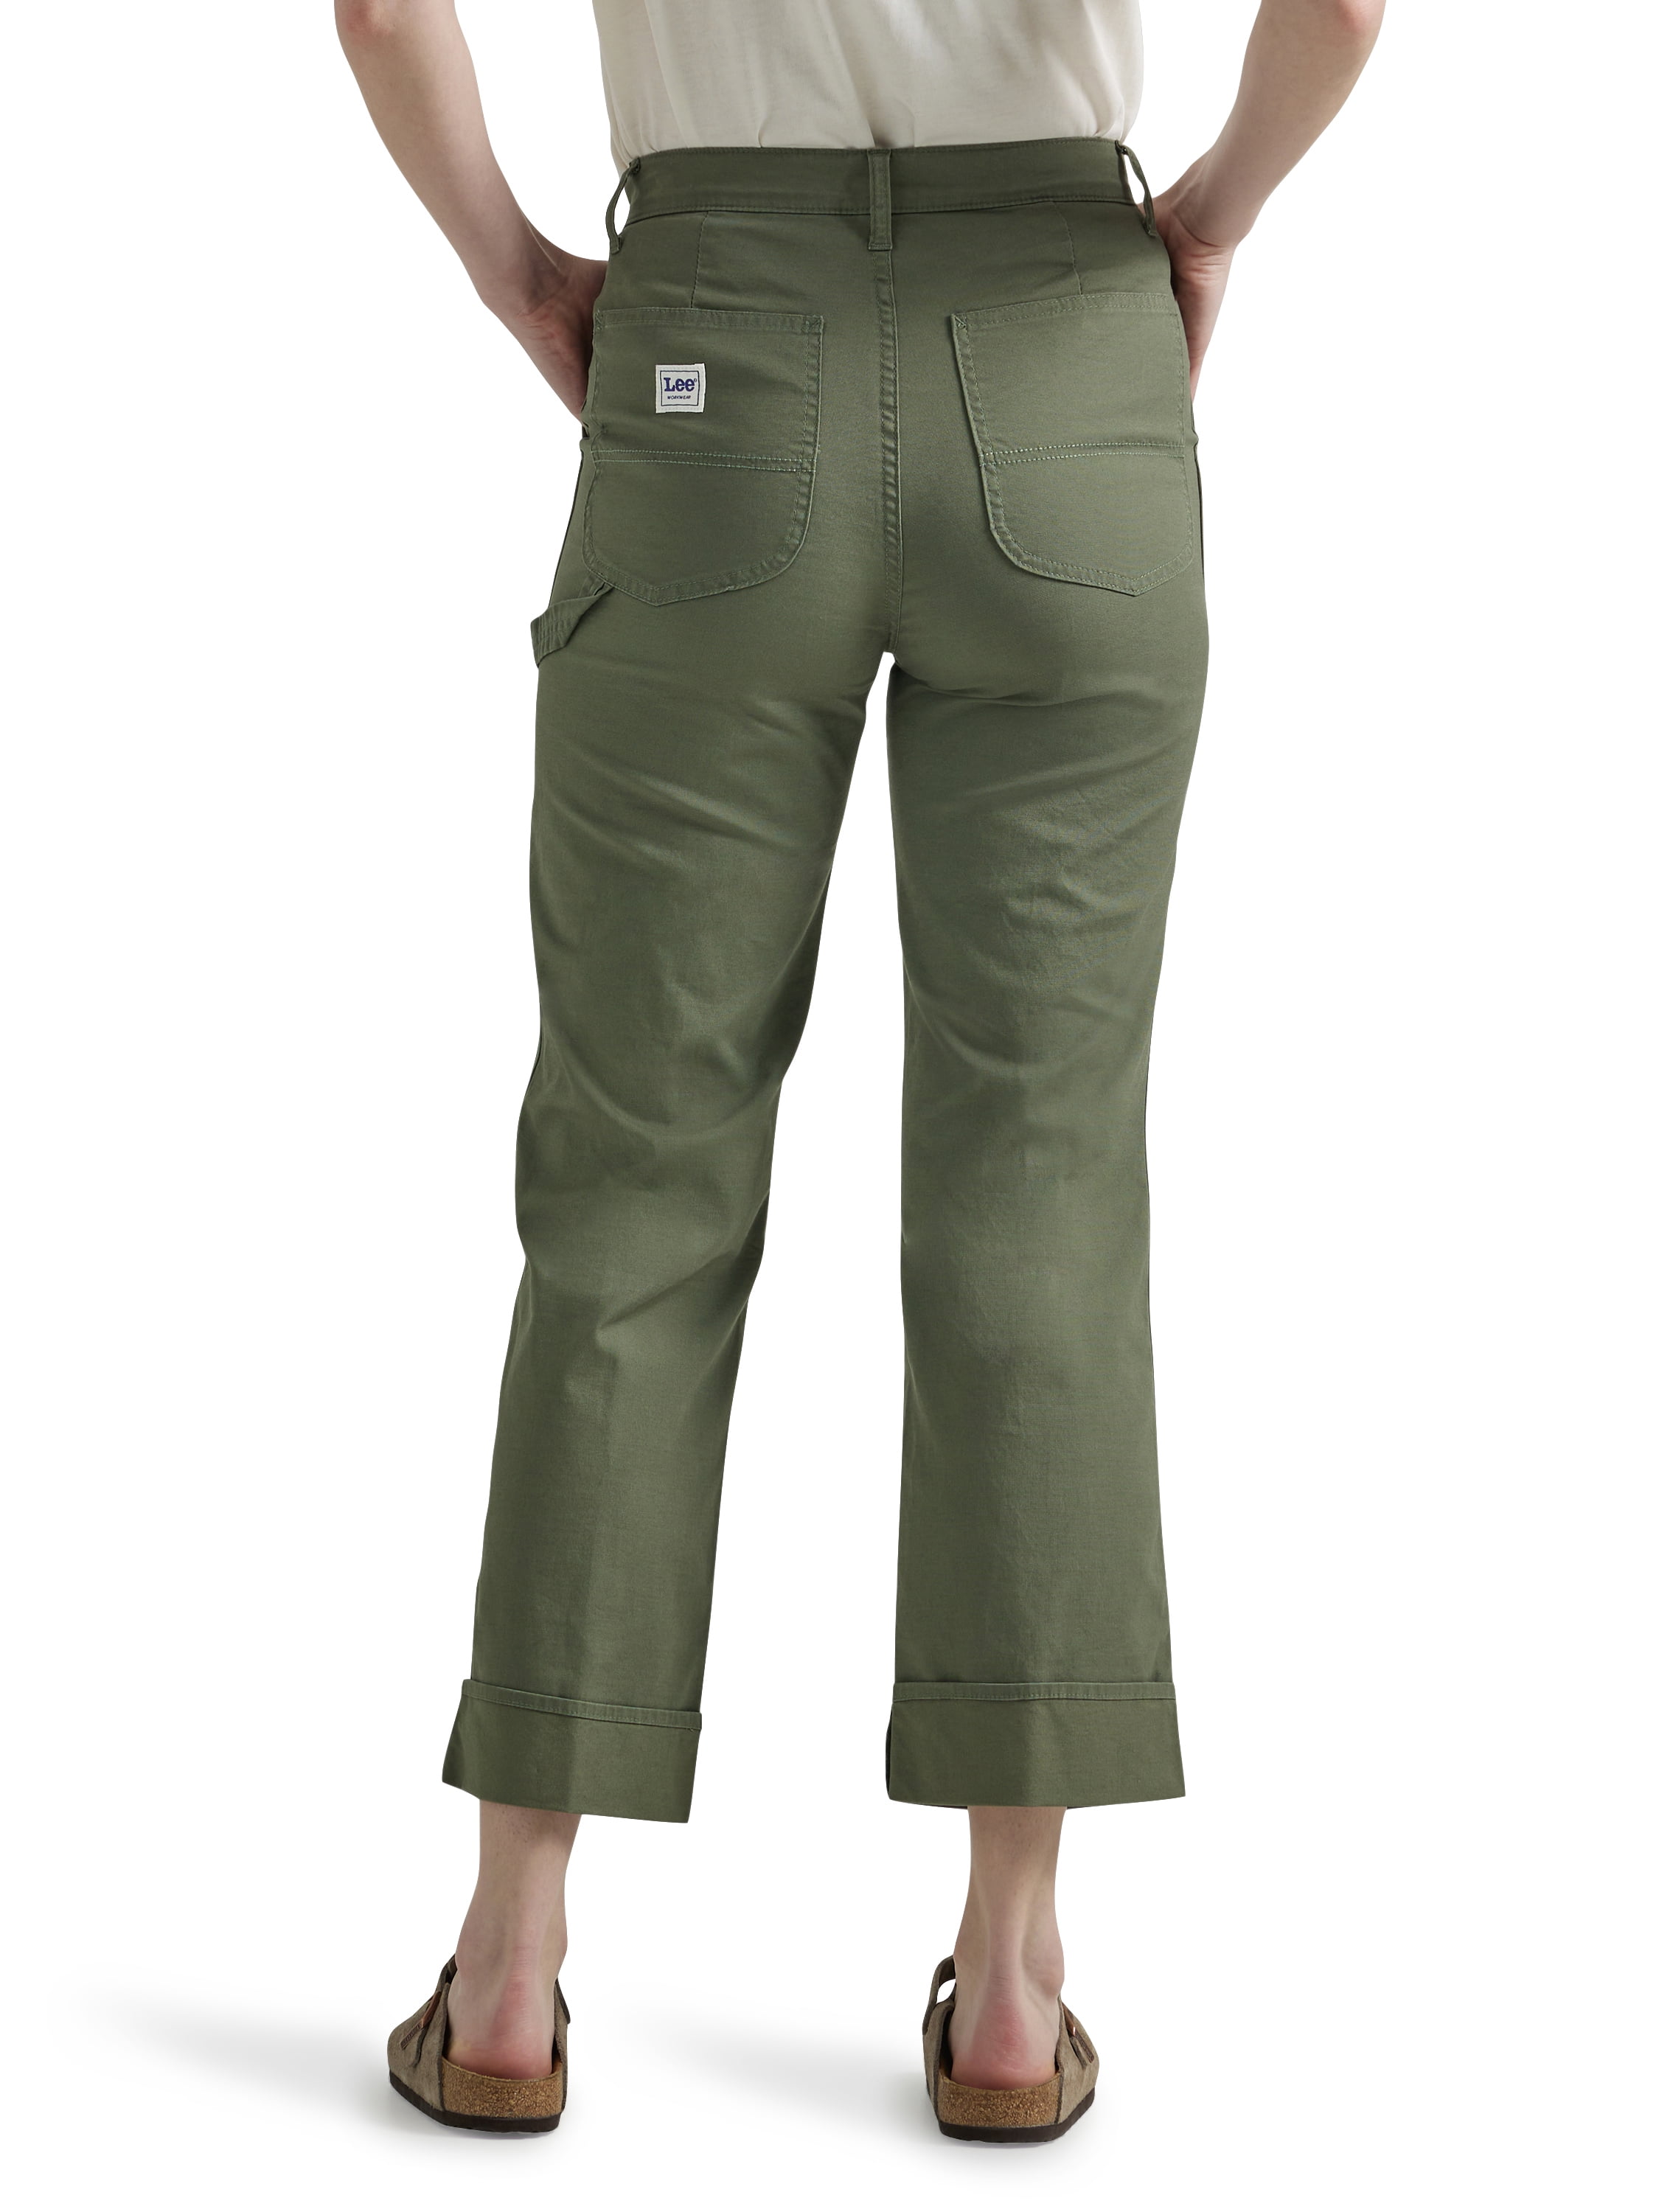 Lee(リー) 【22秋冬】OUTDOORS UTILITY PAINTE PANTS M OLIVE LM8607-121-